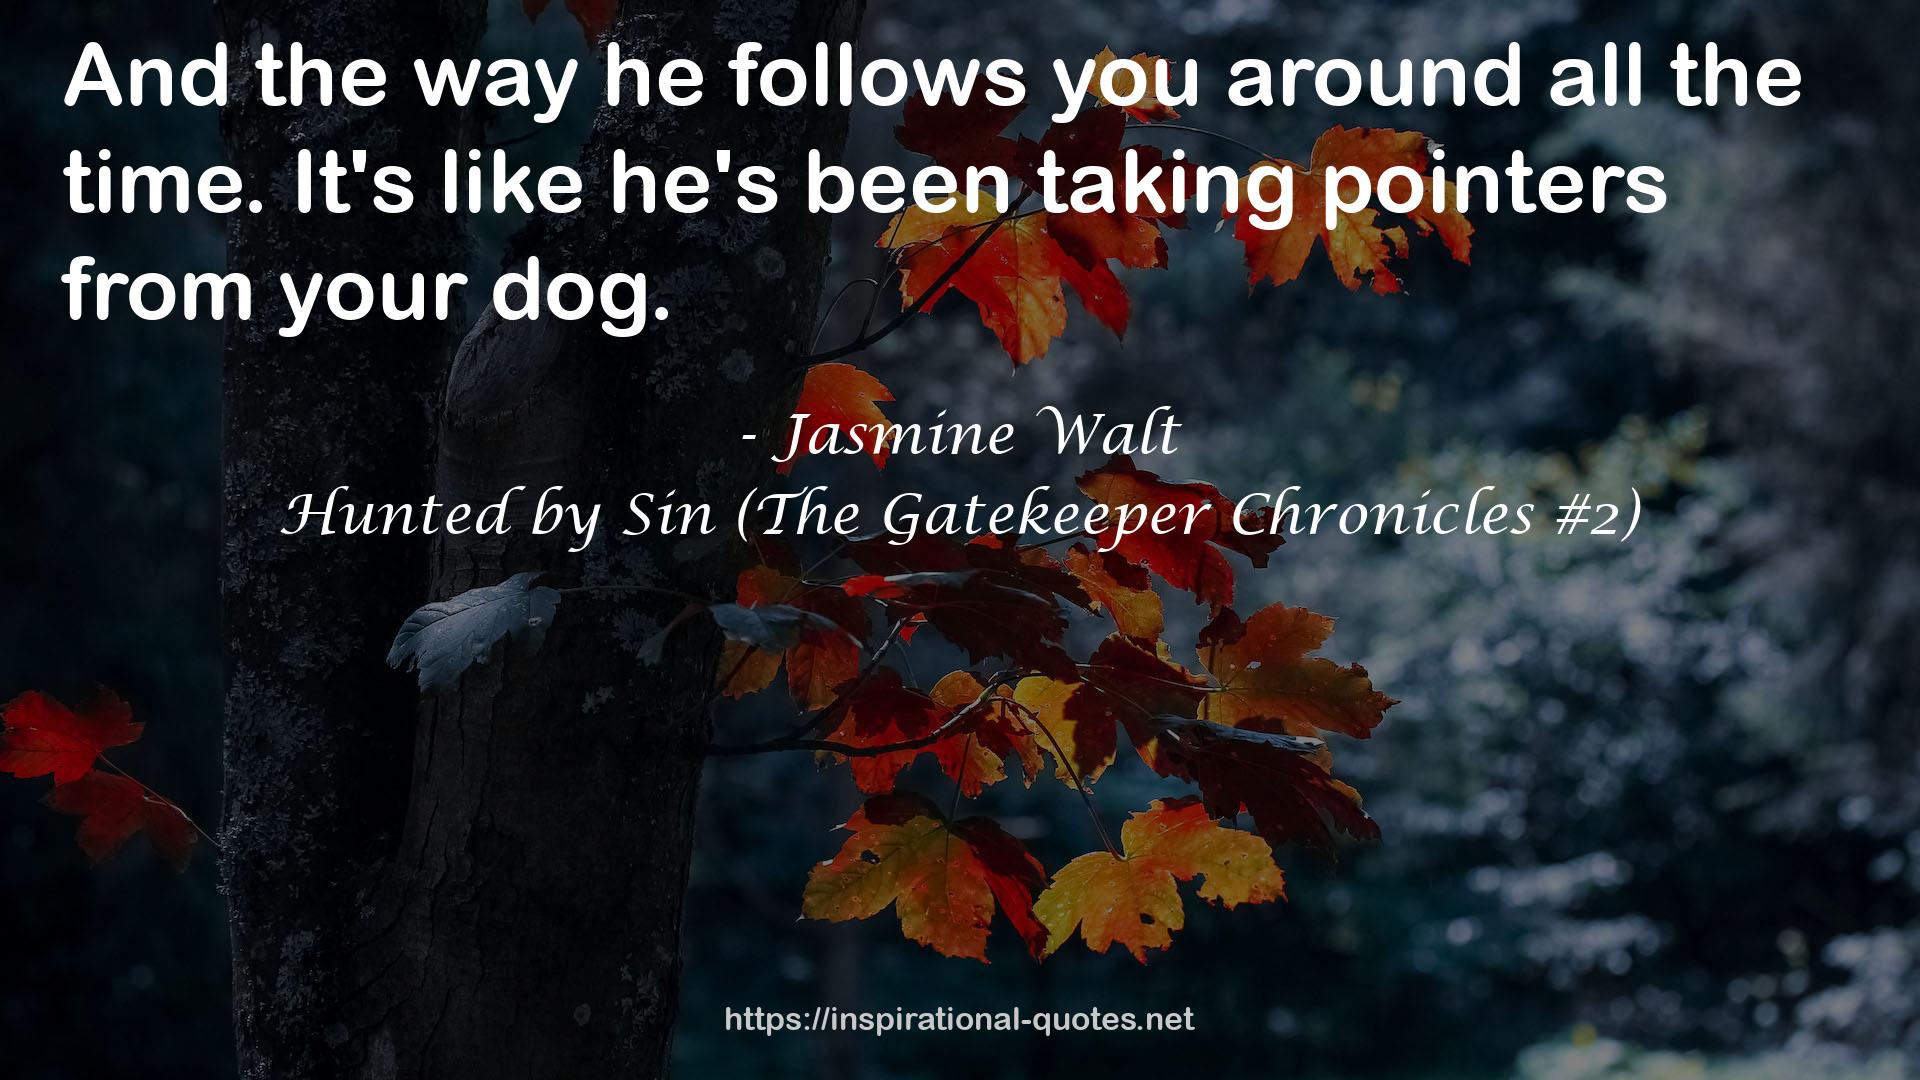 Hunted by Sin (The Gatekeeper Chronicles #2) QUOTES